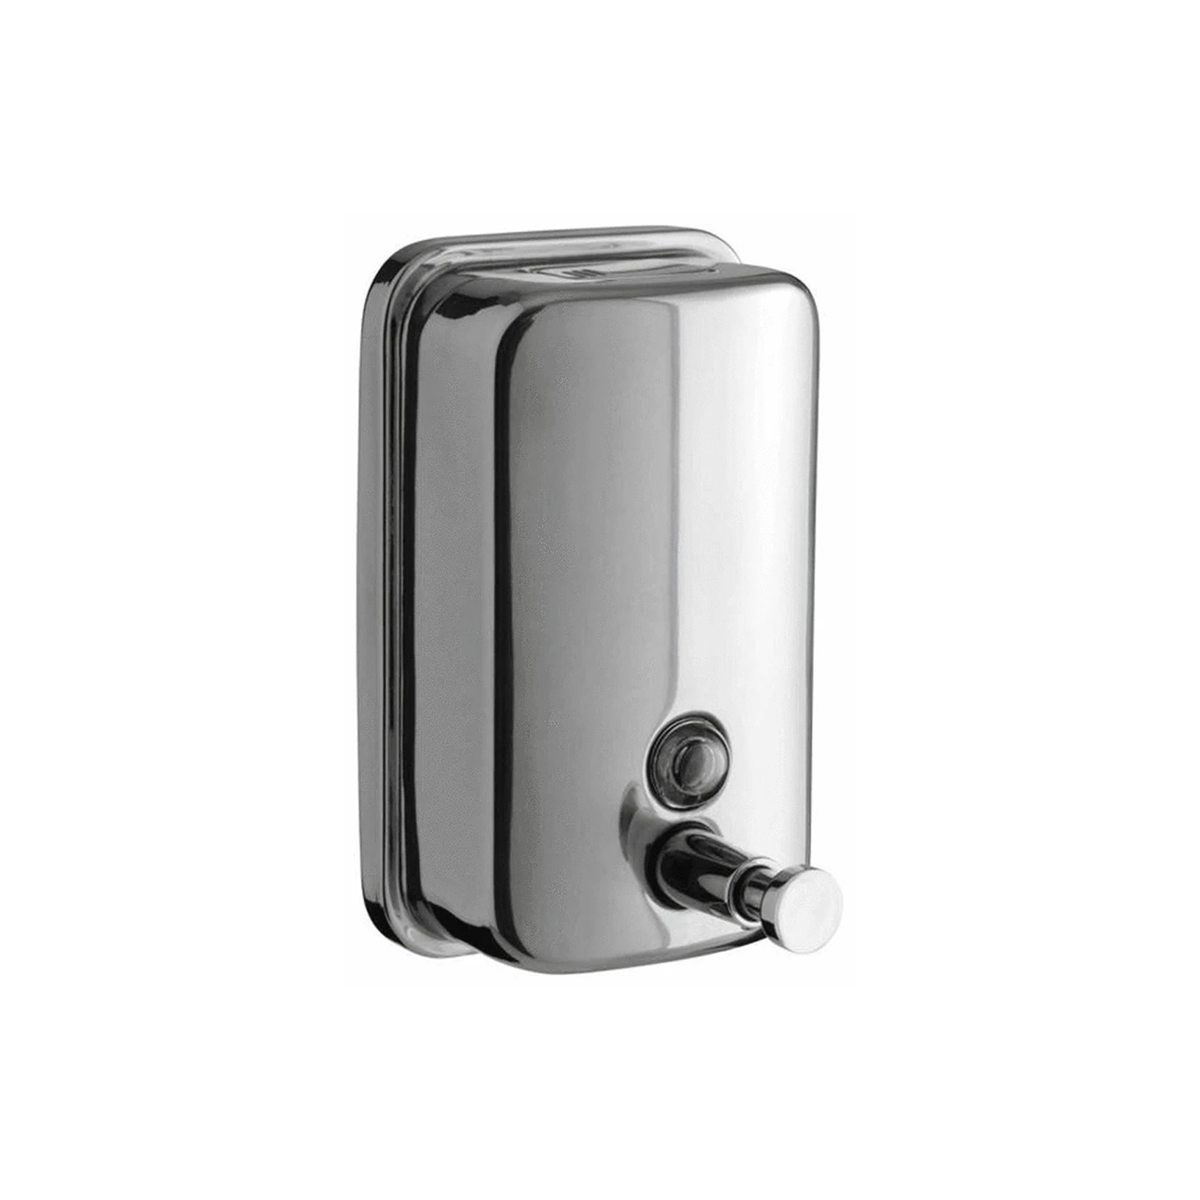 Wall Mounted Stainless Steel Liquid Soap Dispenser